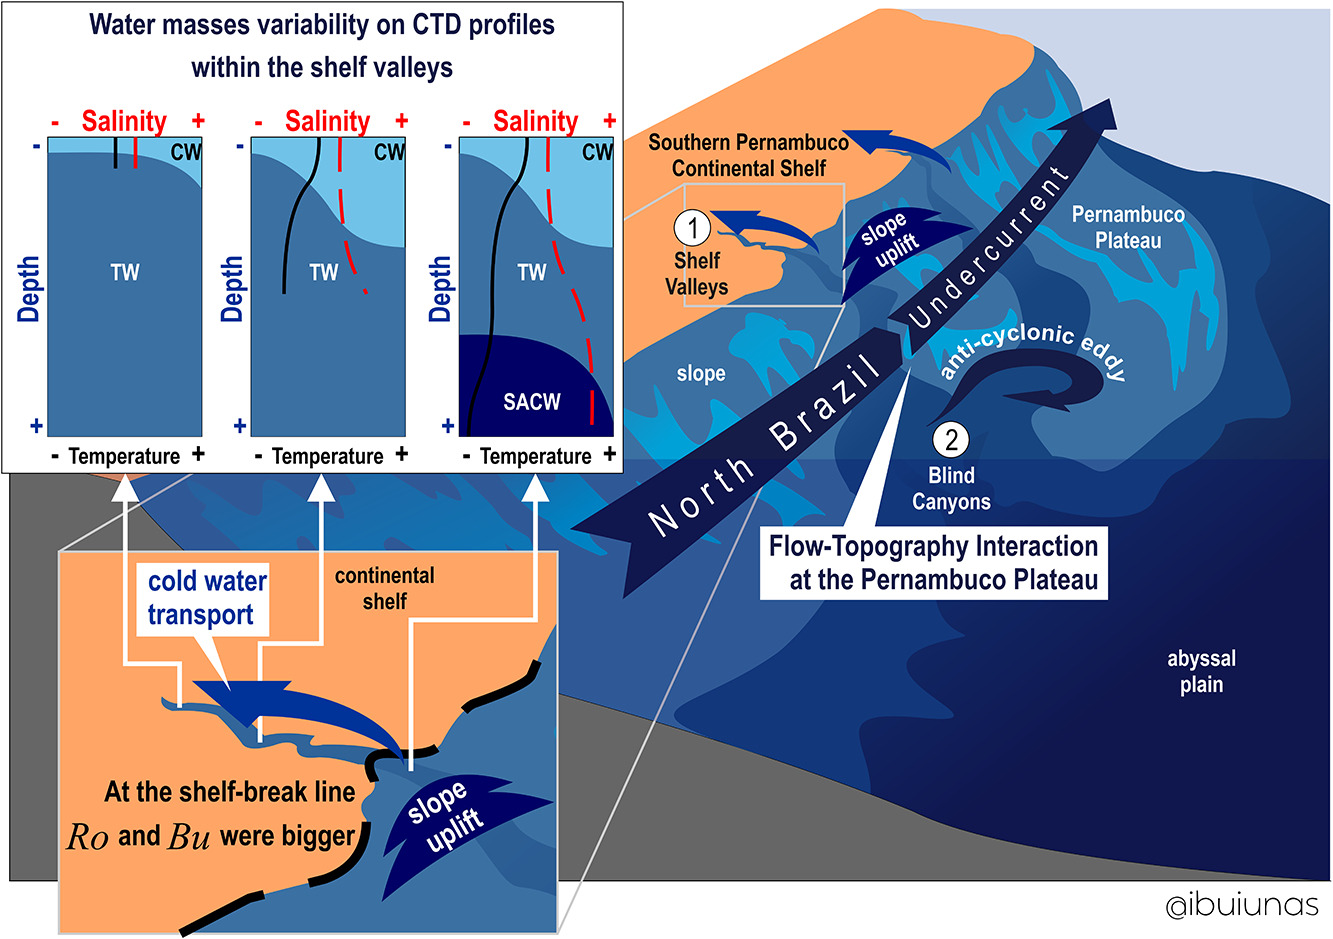 Flow-topography interactions in the western tropical Atlantic boundary off Northeast Brazil